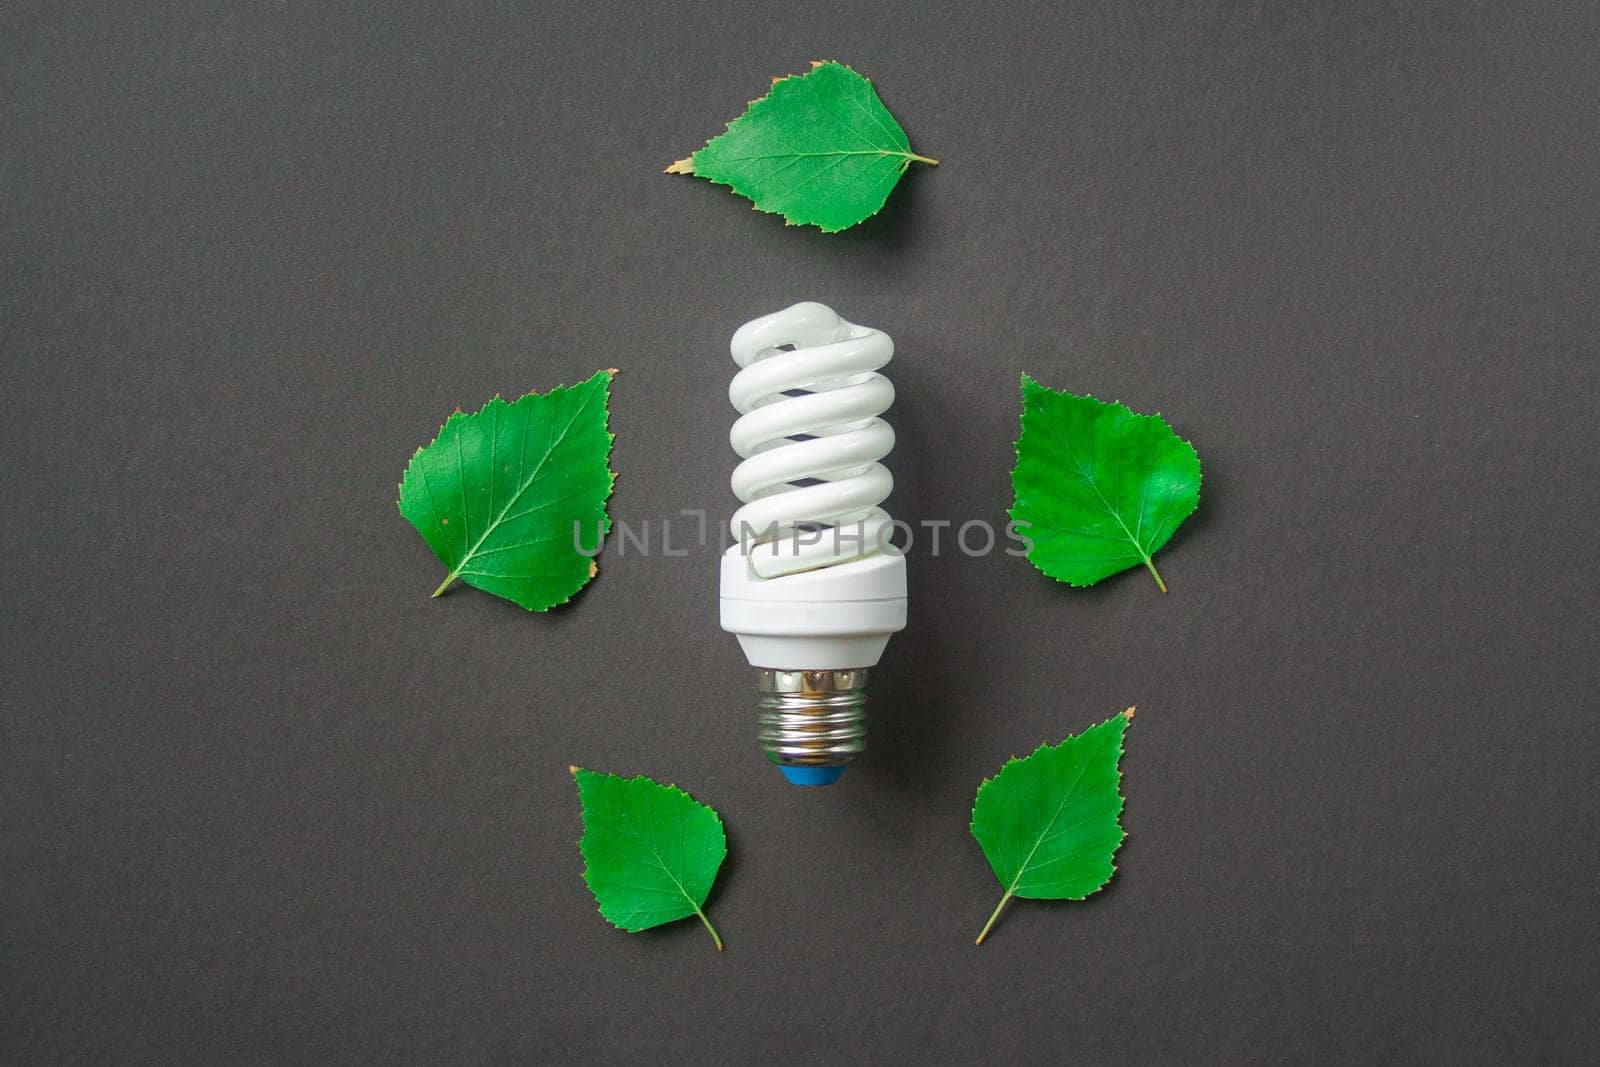 Light bulb with green leaves on black background by Quils